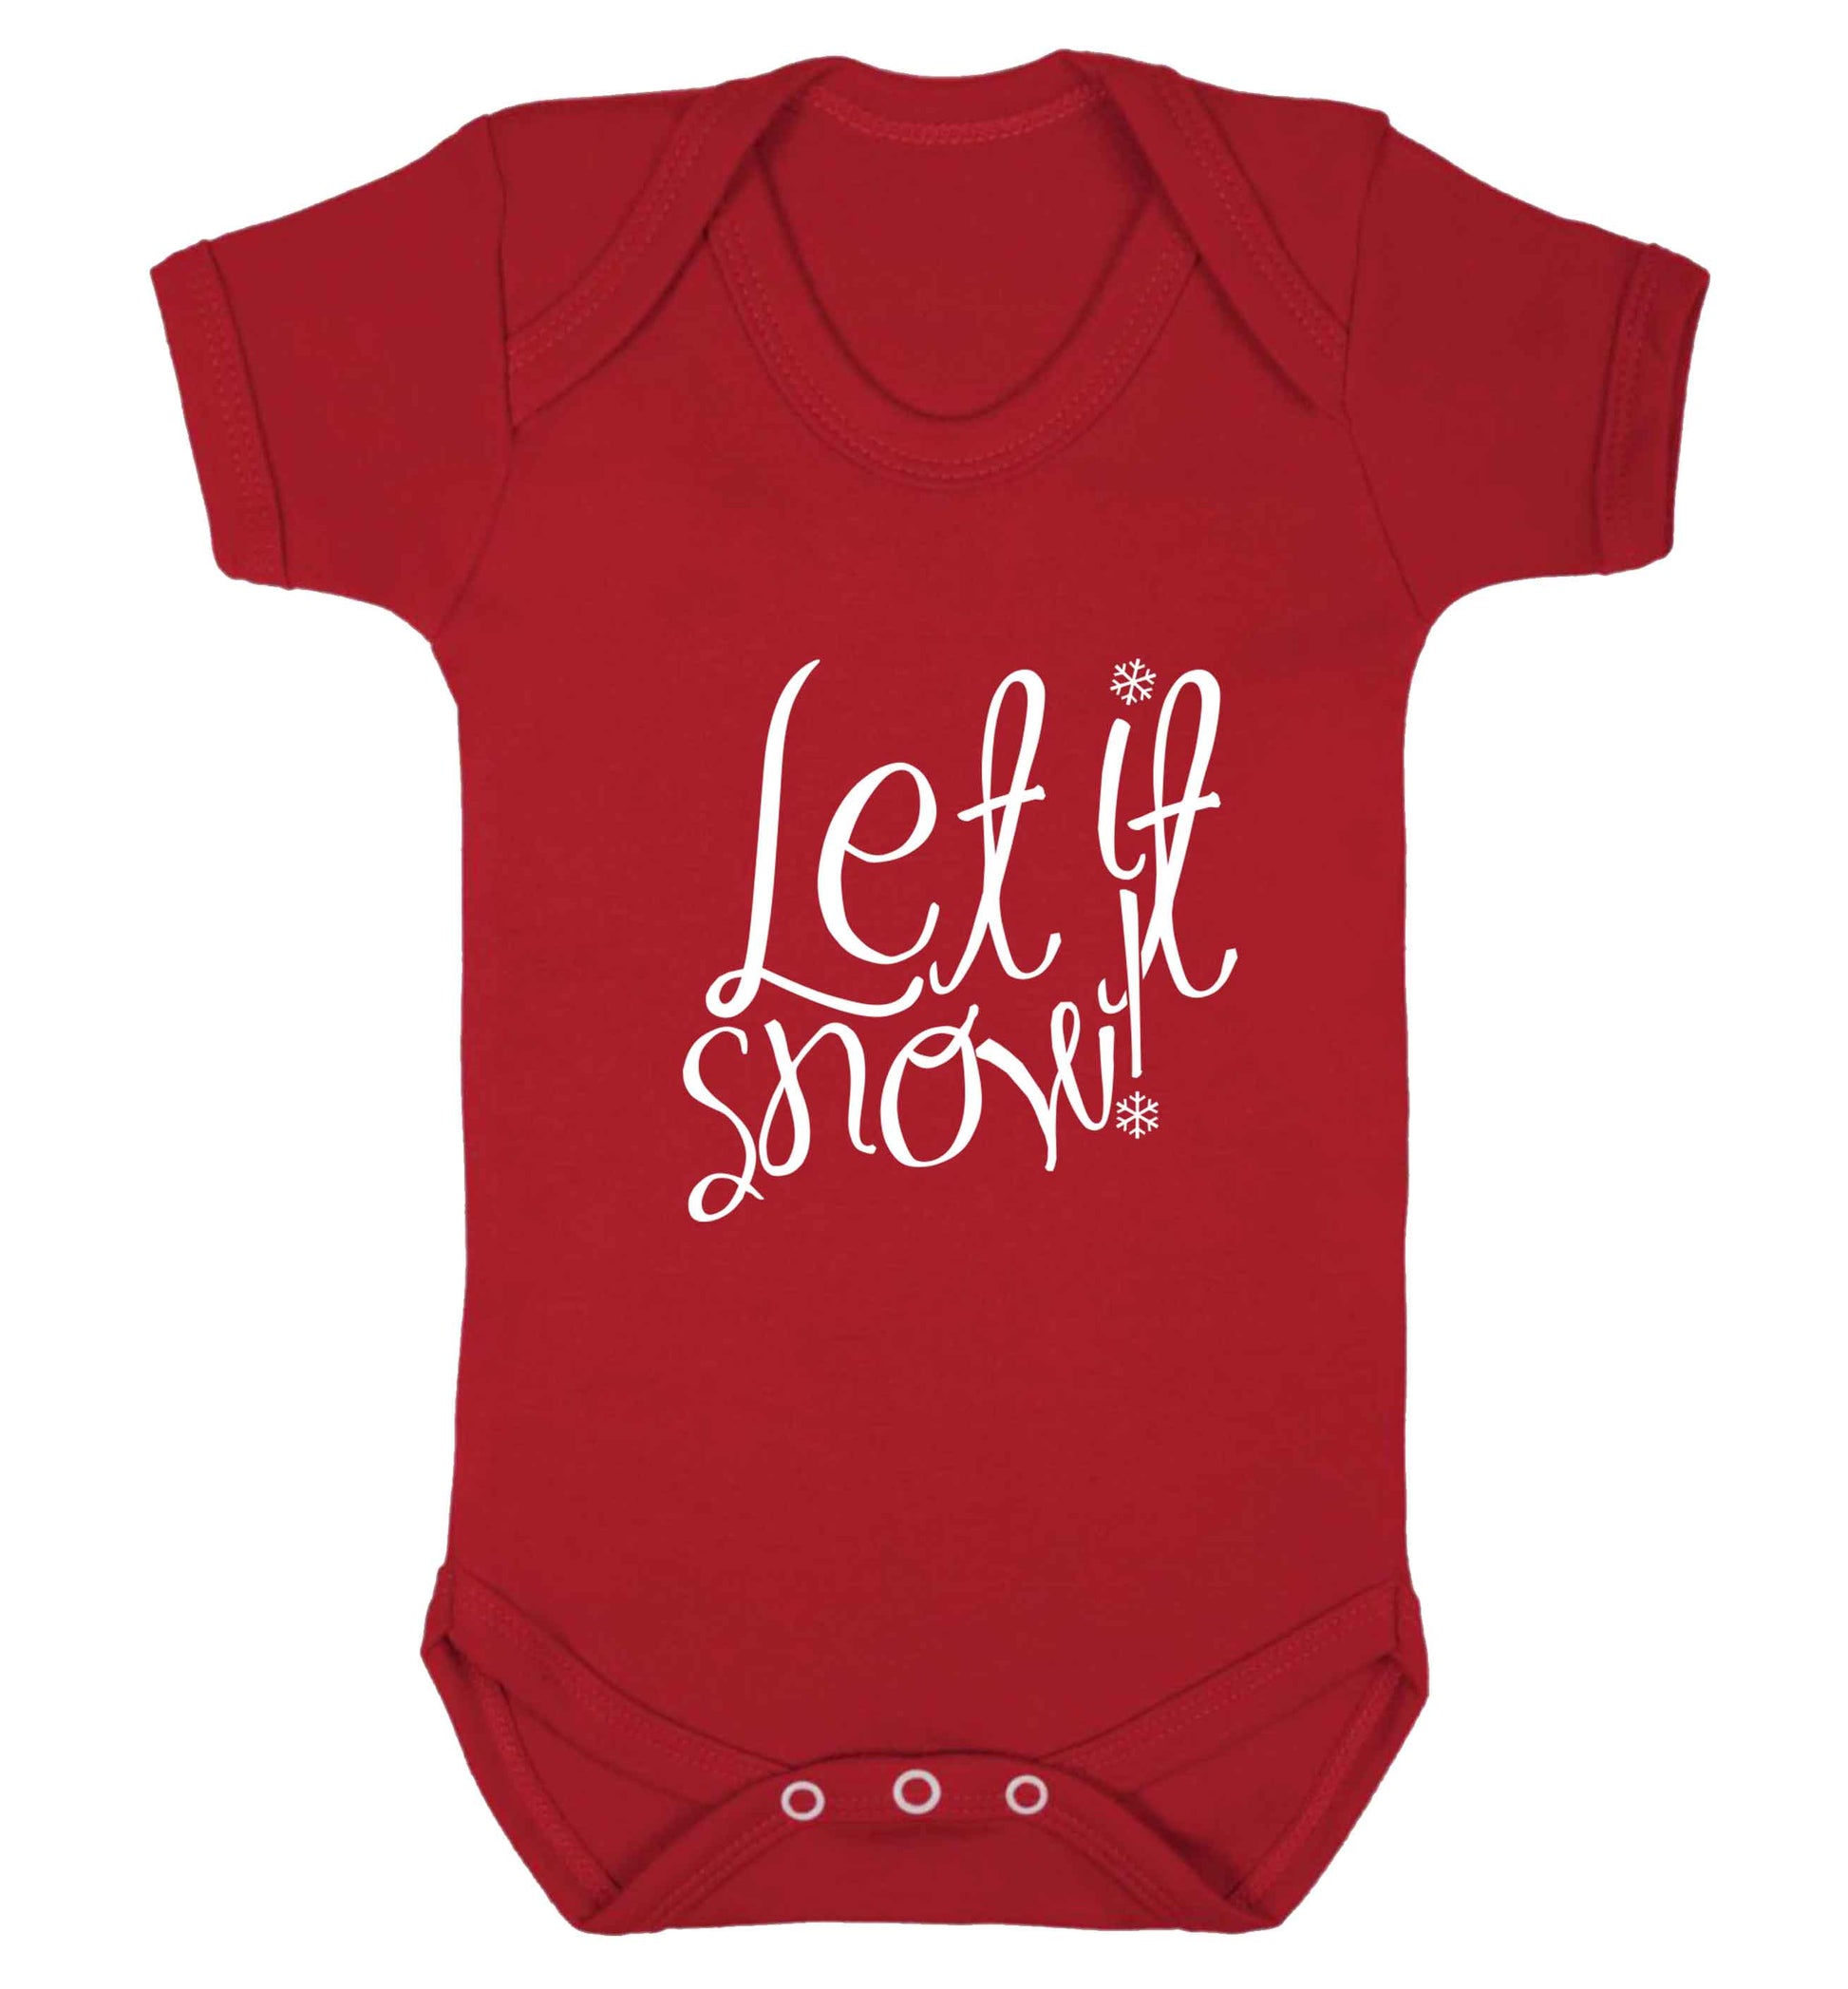 Let it snow baby vest red 18-24 months